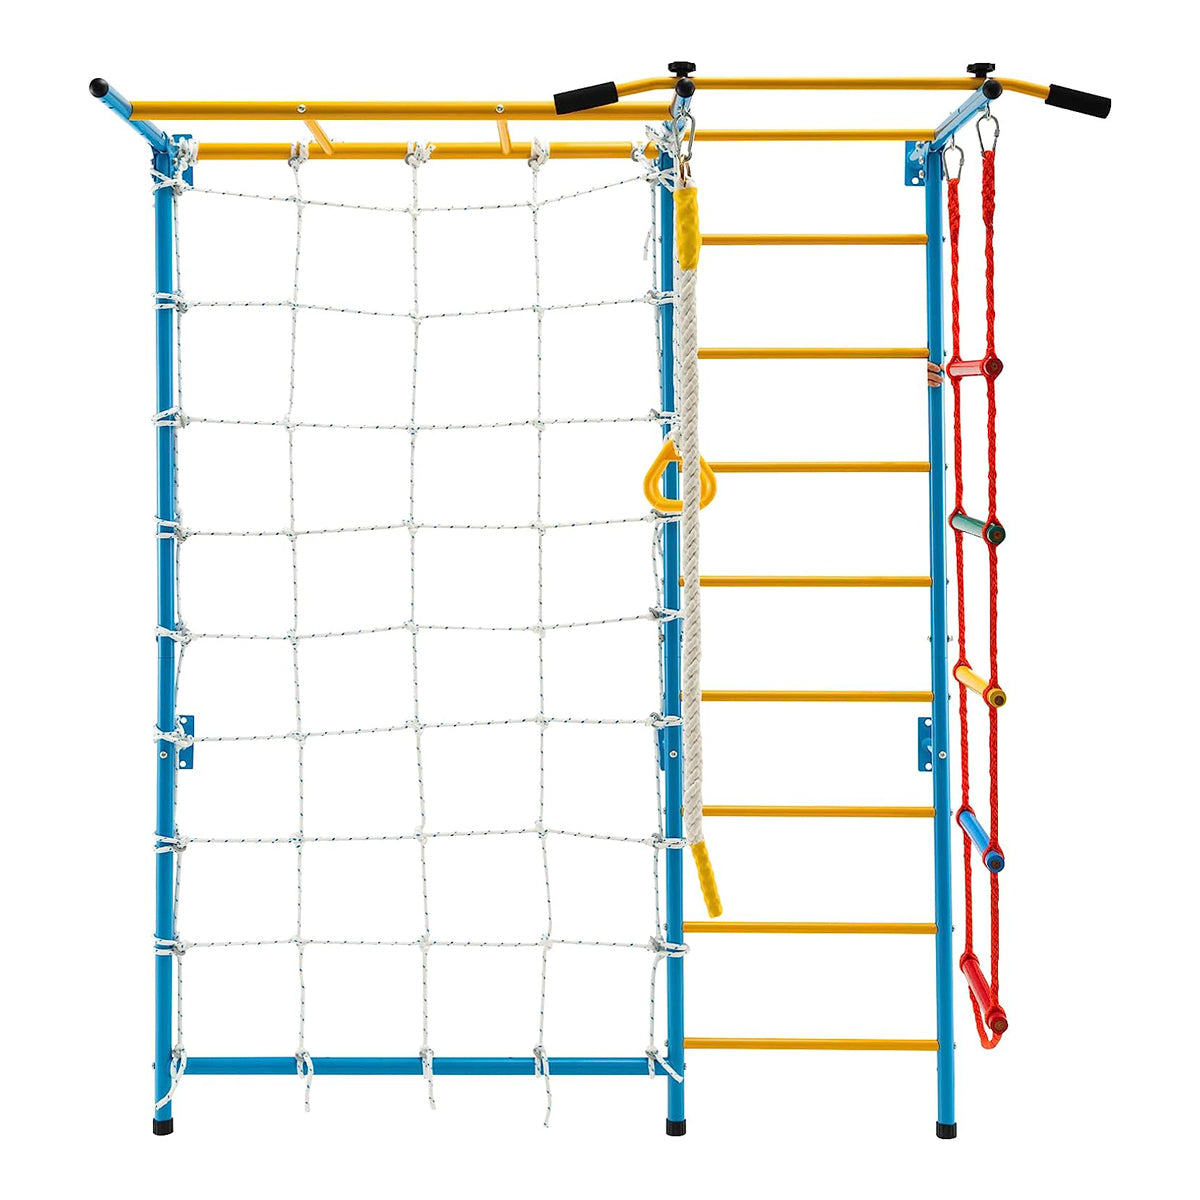 MEMAX 7 In 1 Climbing Wall for Kids, Indoor Kids Gym Playset for Exercise, Steel Ladder Wall Set with Wall Ladder, Pull-up Bar, Climbing Rope and Gymnastic Rings, Climber Ladder